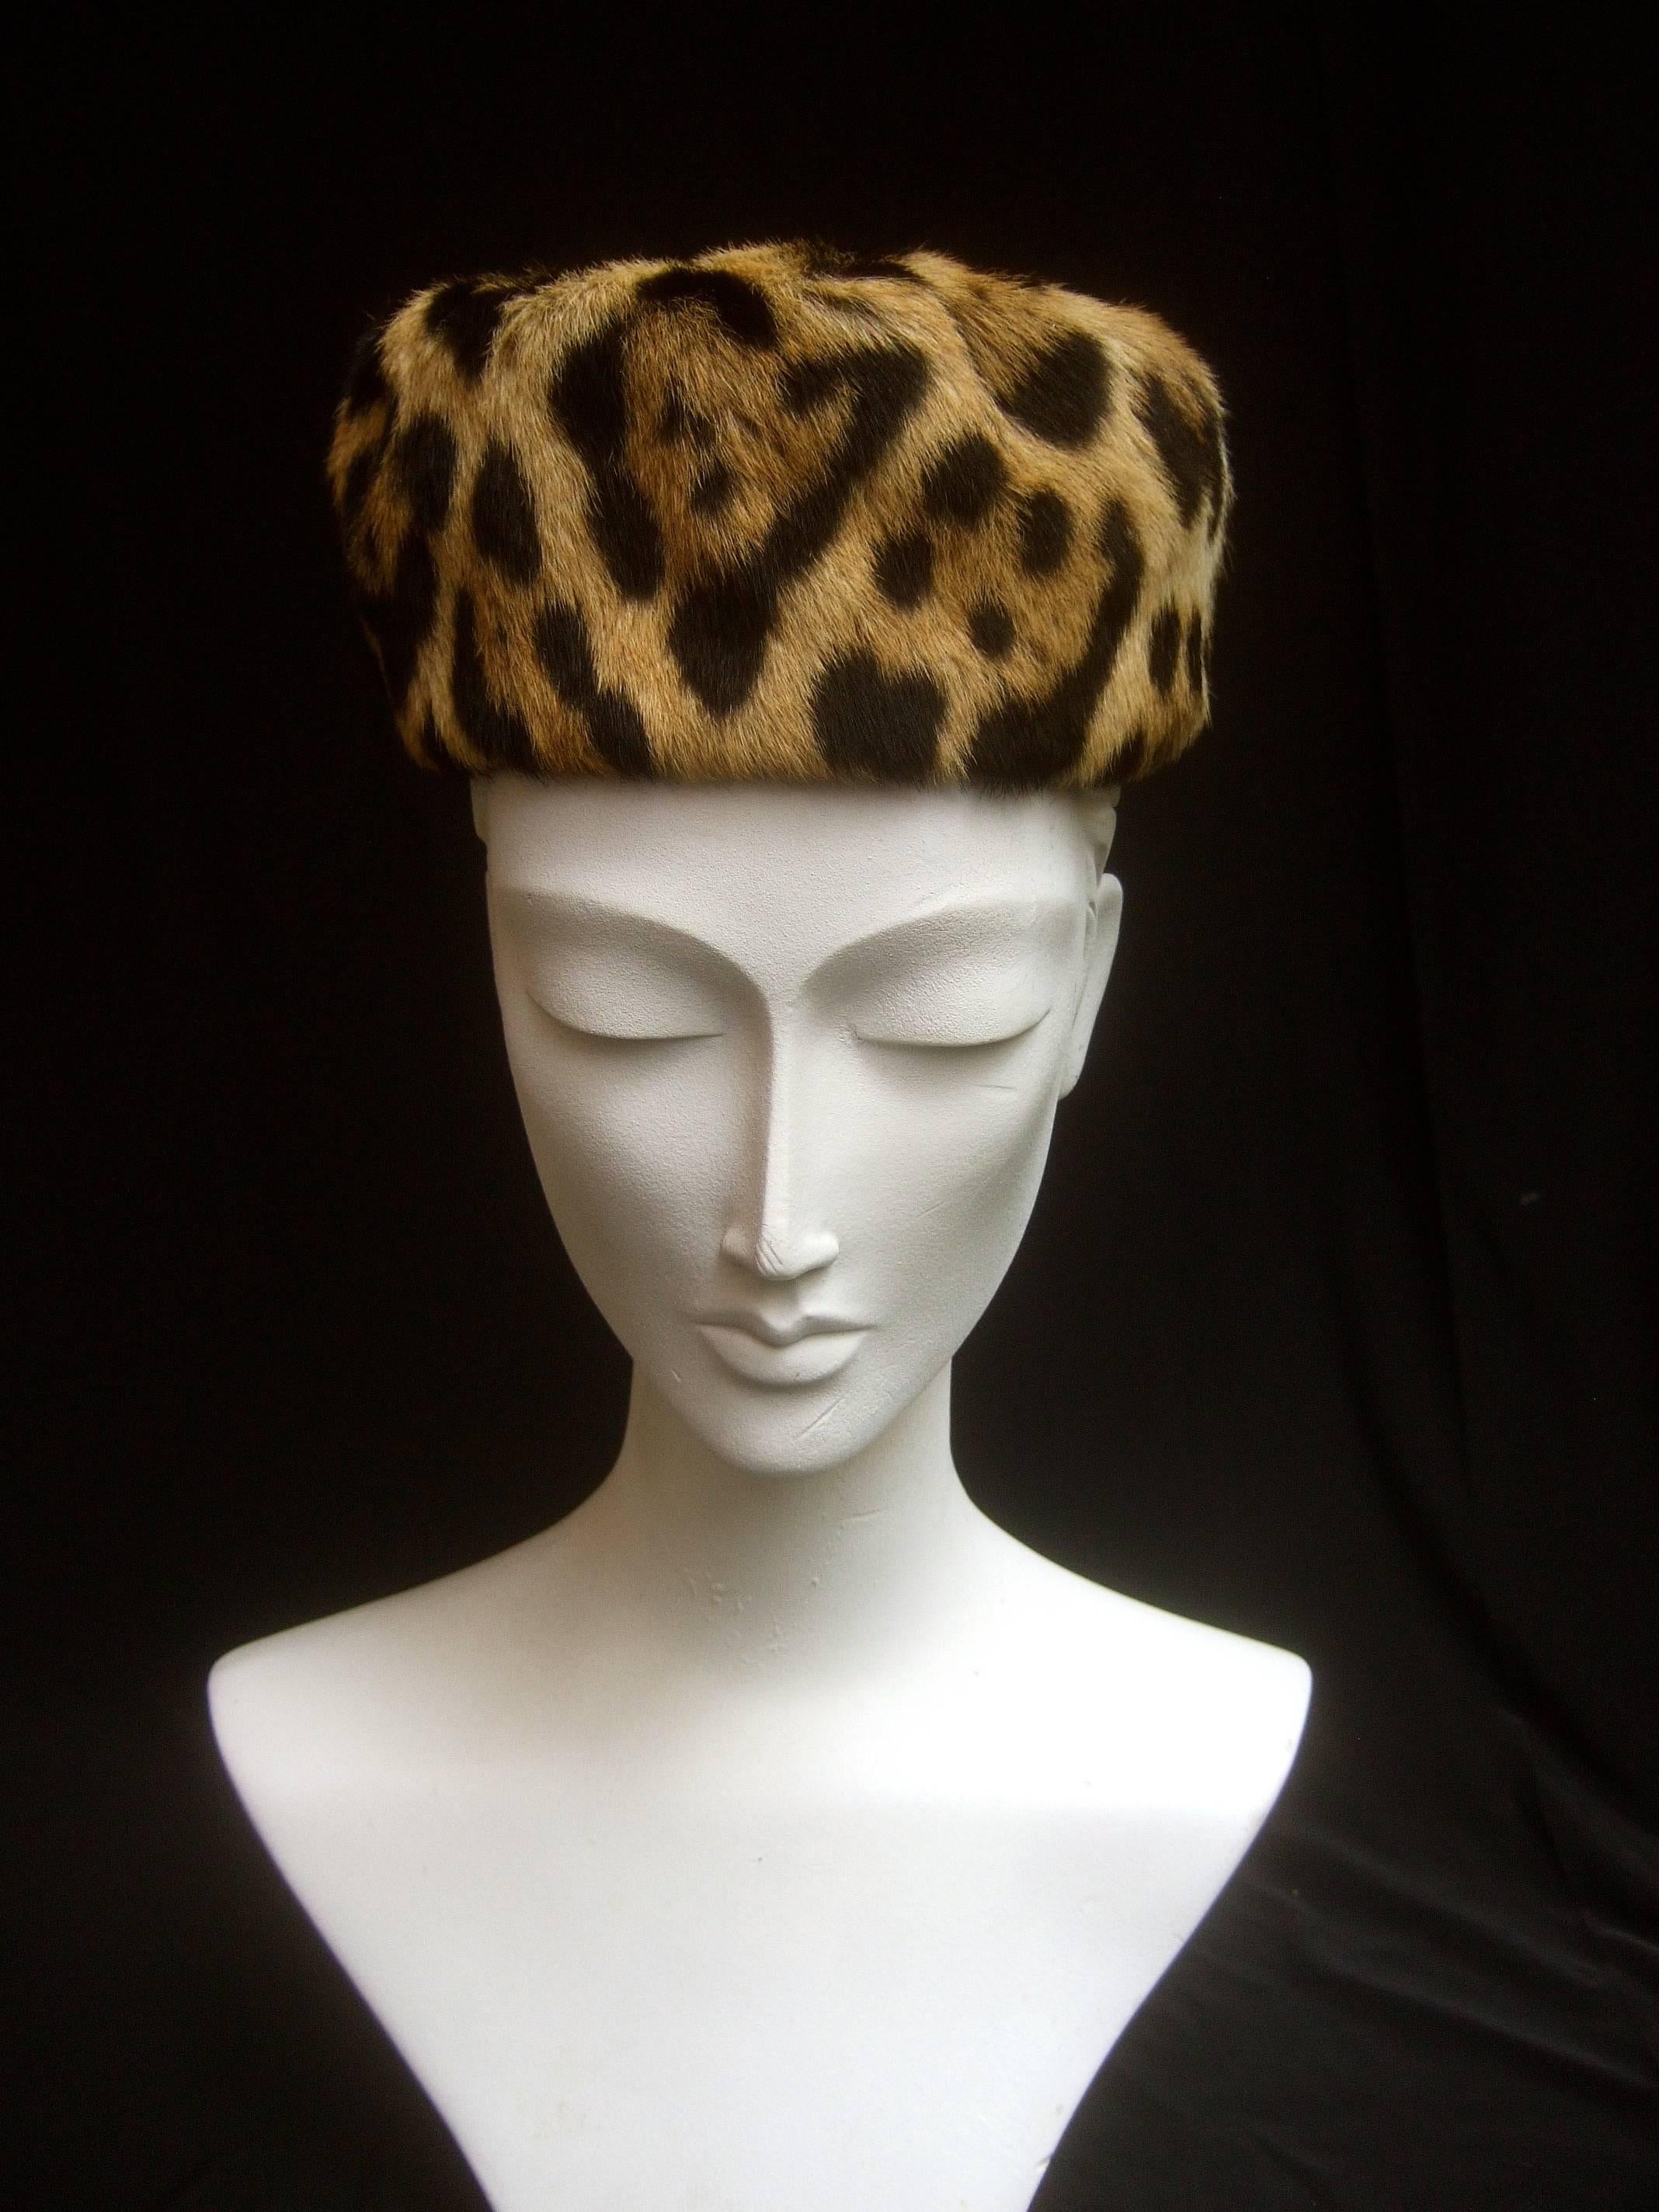 Saks Fifth Avenue Stamped animal print fur pill box hat c 1960
The chic retro stamped animal print fur hat makes 
a stylish bold accessory 

Labeled: Saks Fifth Avenue 
The interior head size circumference measures 20 inches 